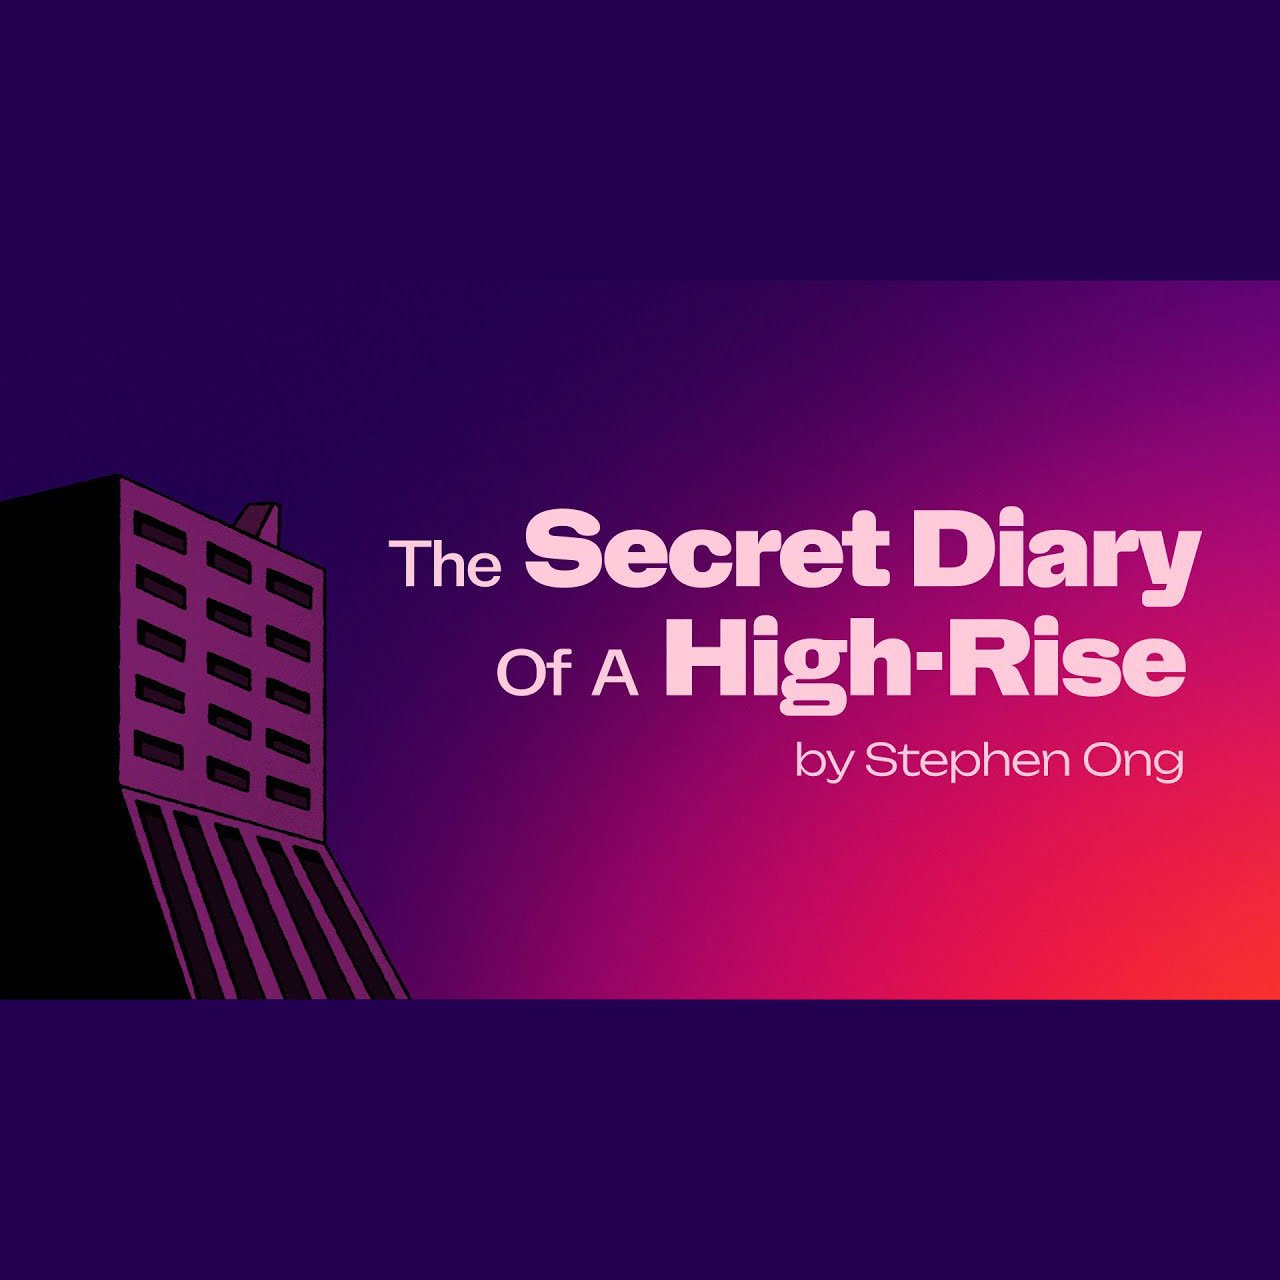 The Secret Diary of a High-Rise